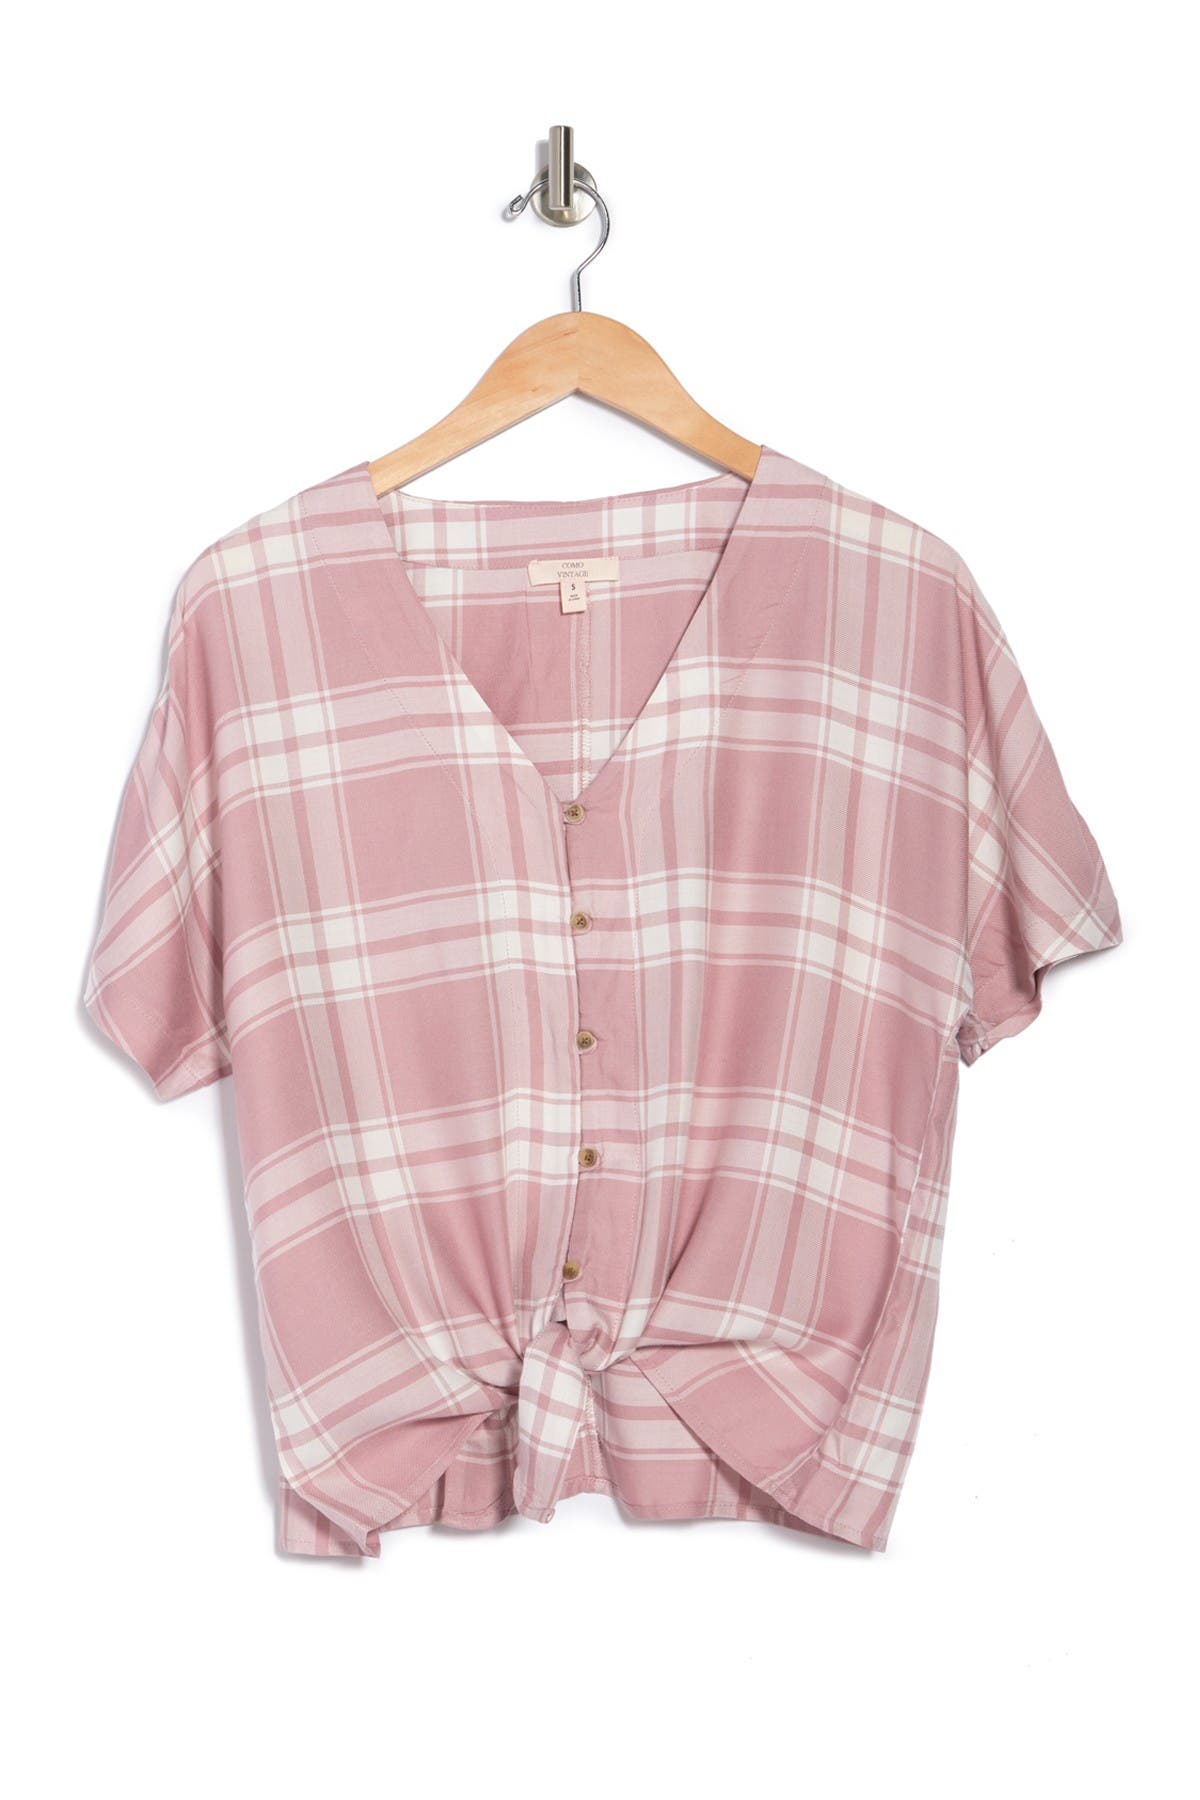 Como Vintage Short Sleeve Tie Front Top In Dusty Pink Plaid